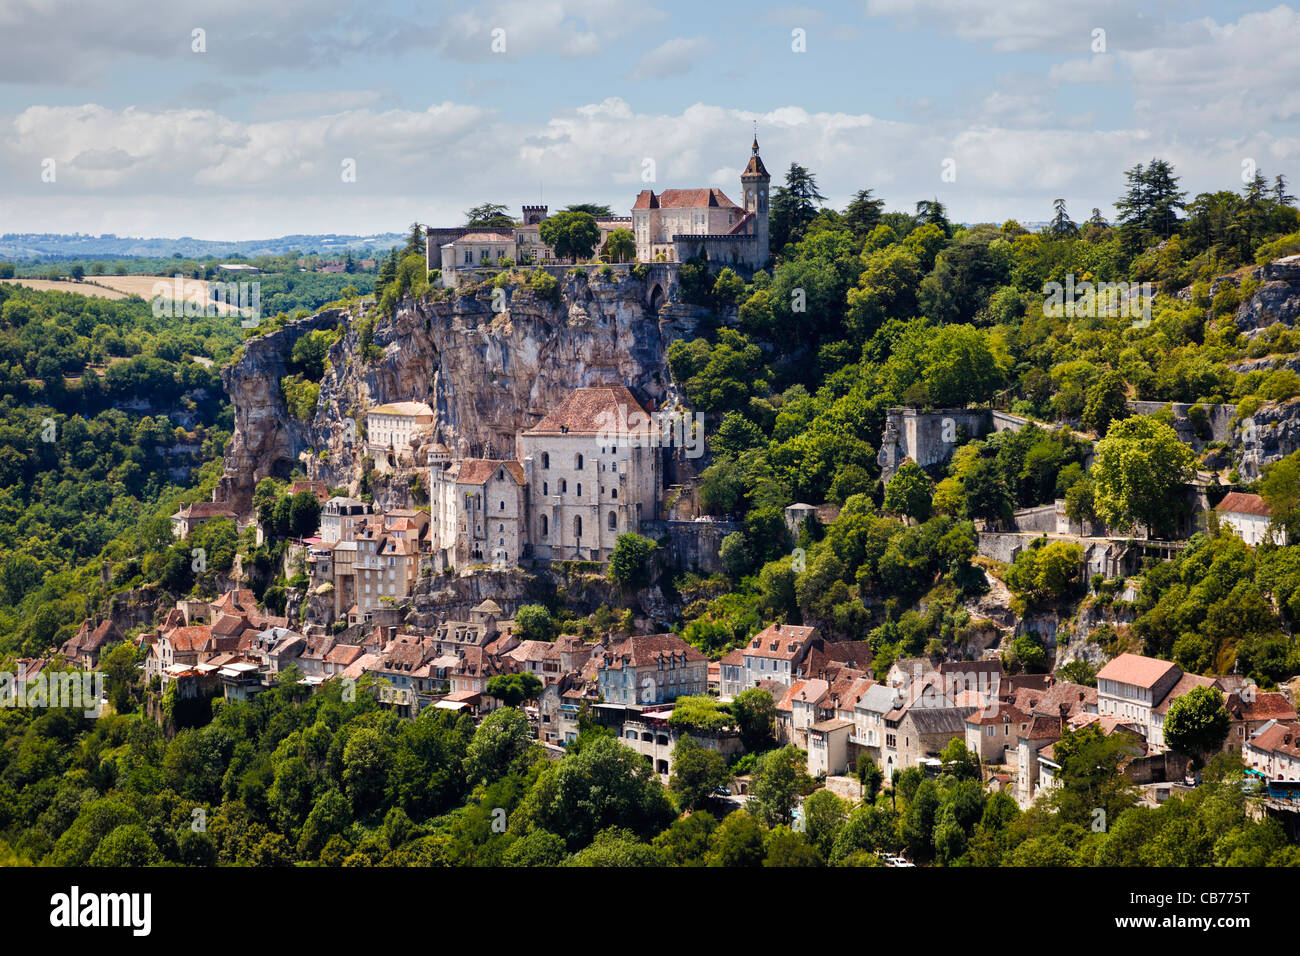 Rocamadour in the Lot region of France, Europe Stock Photo